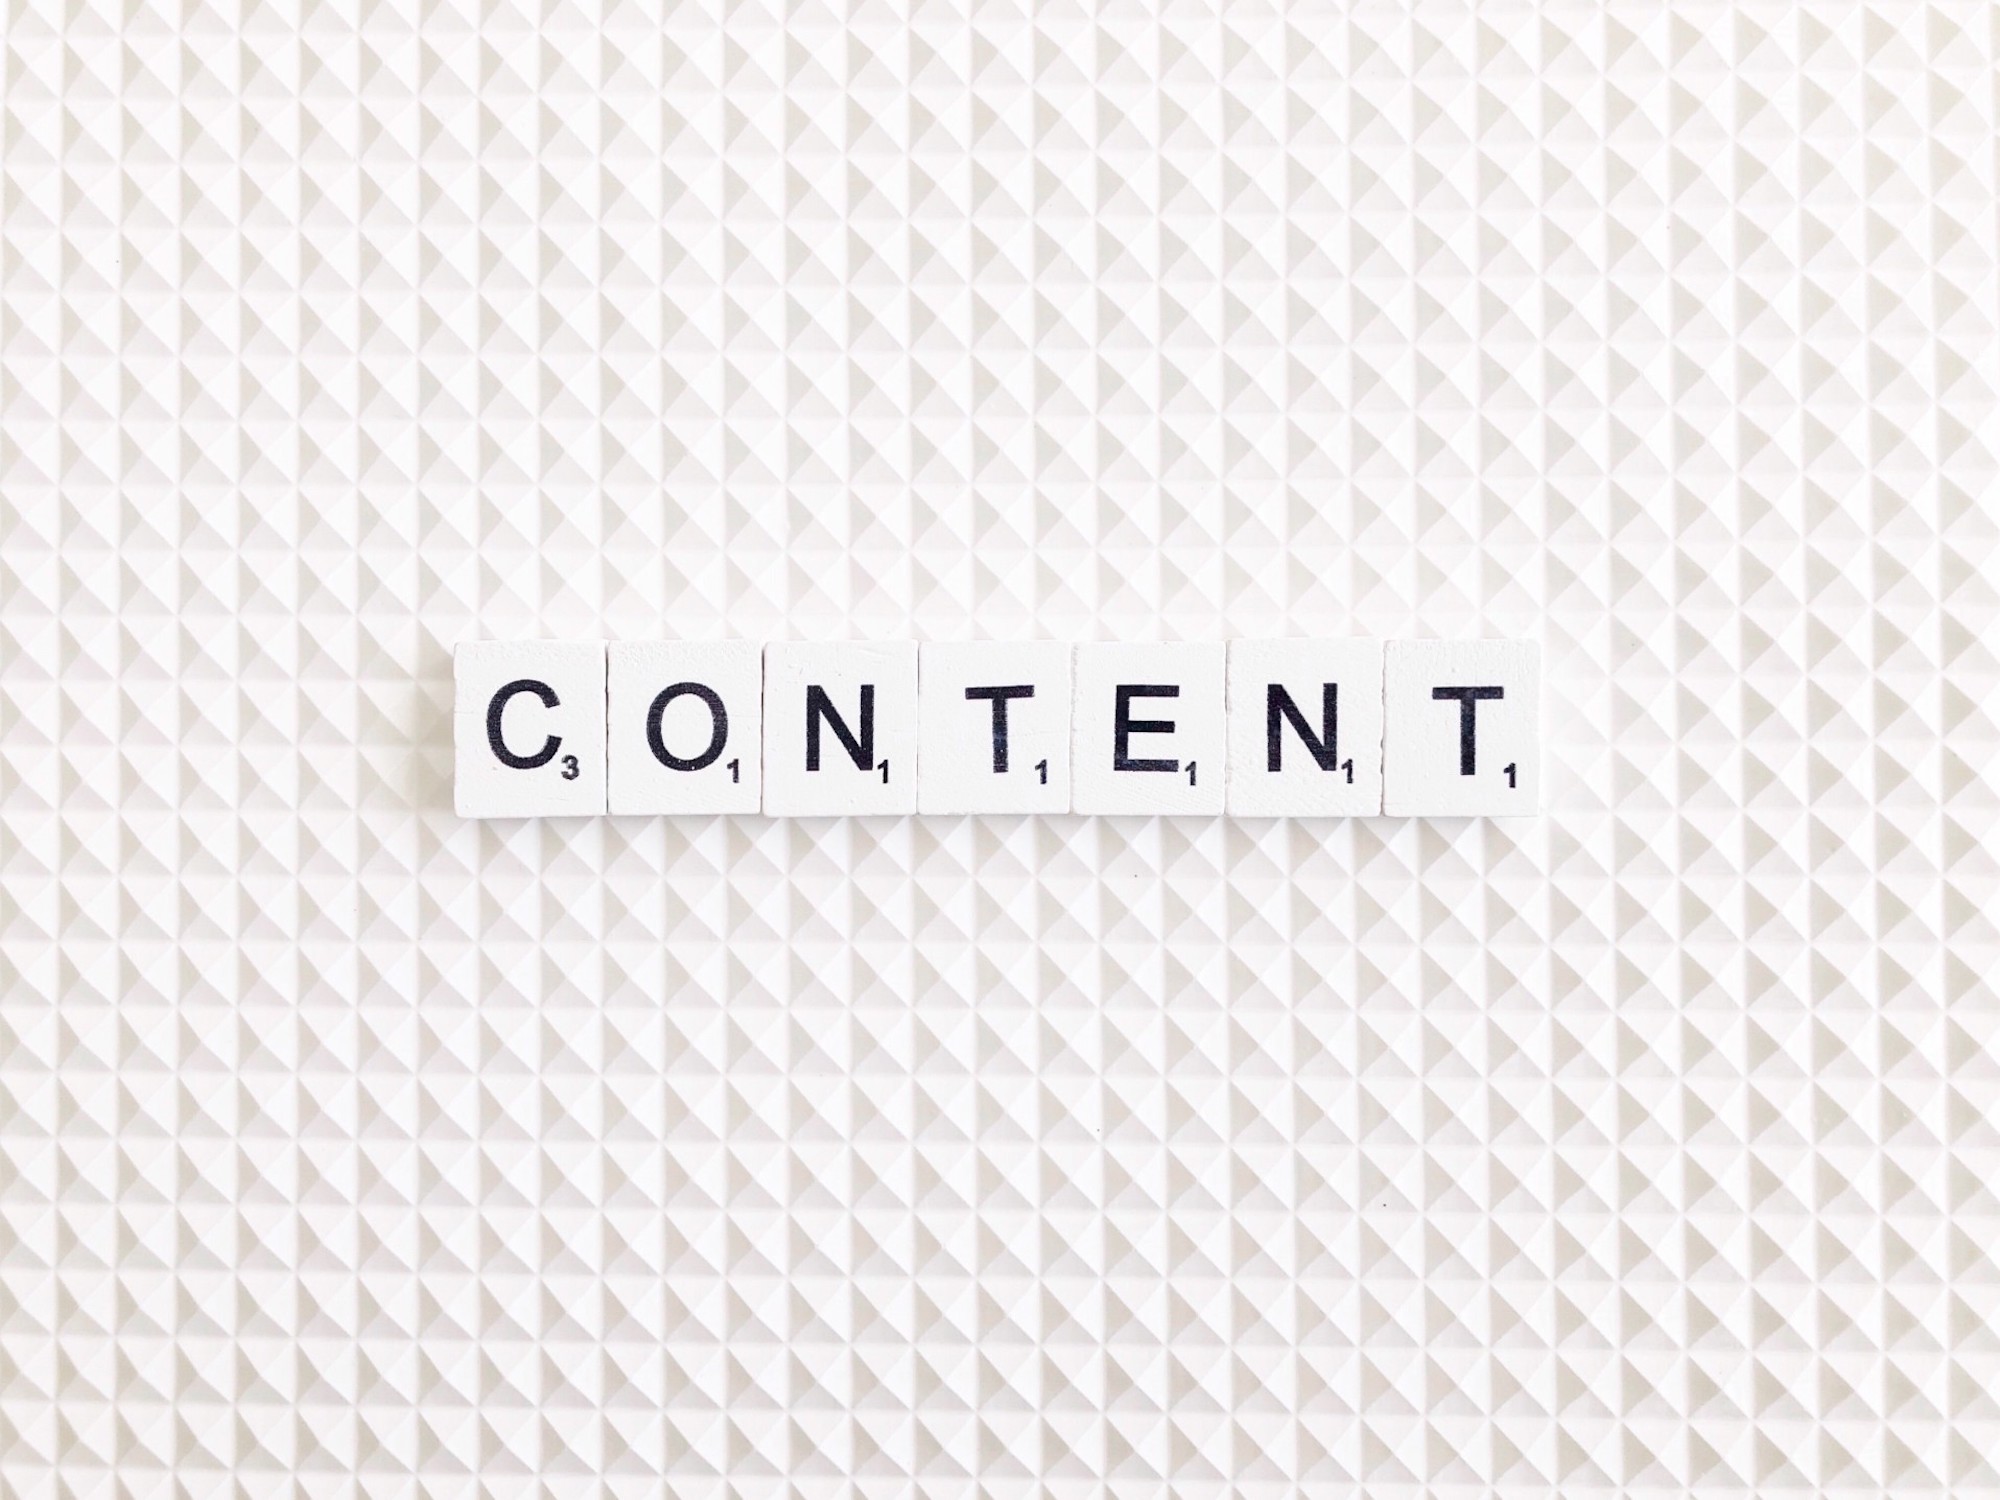 Make sure that your content is epic.